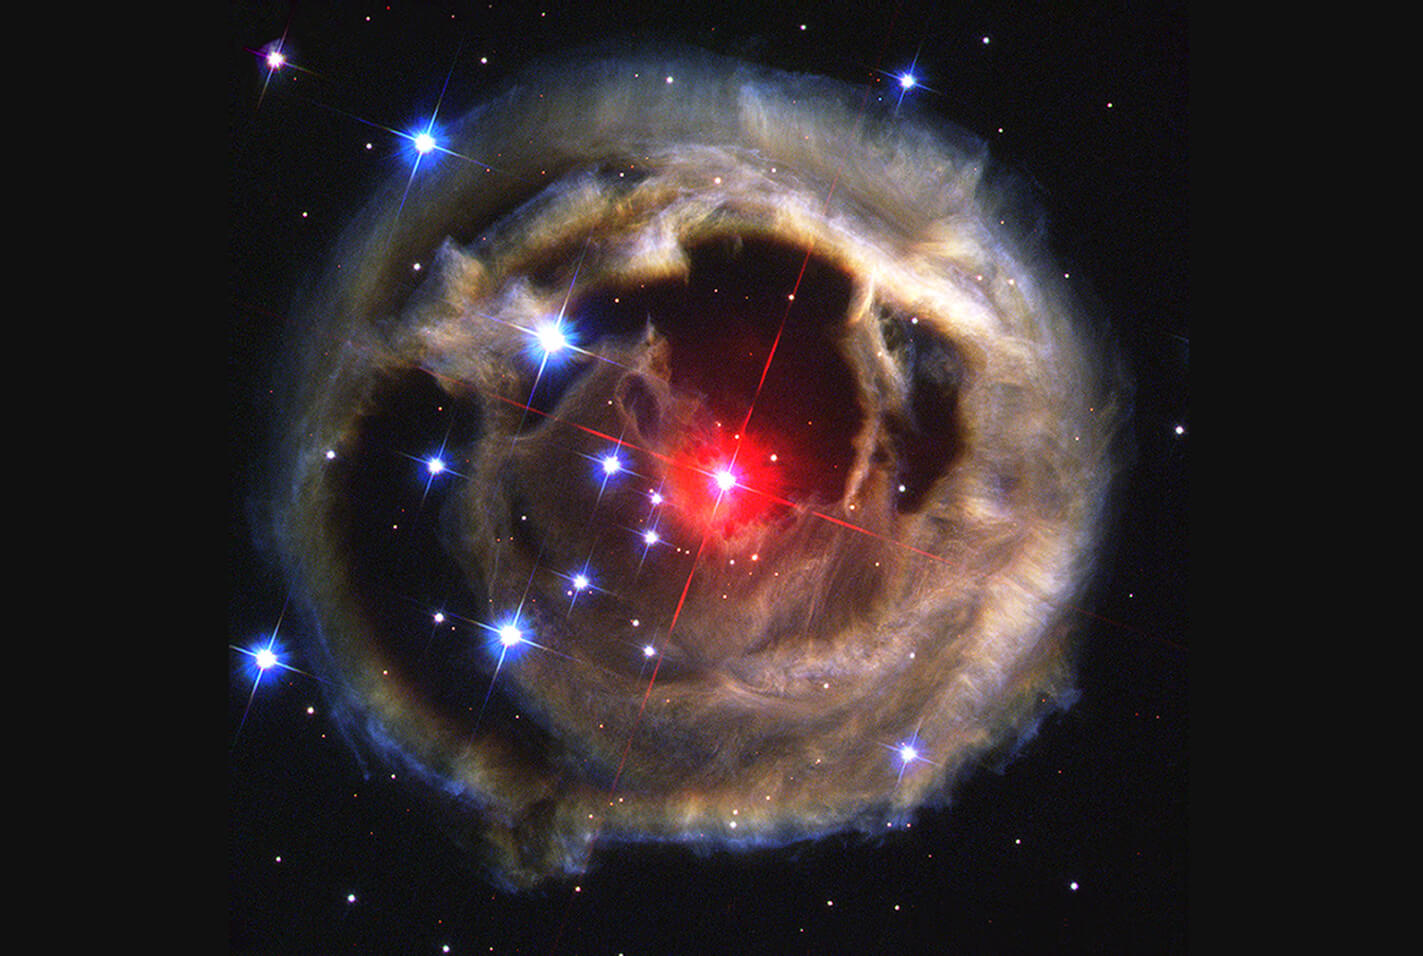 Star surrounded by dust varying from red to blue with holes